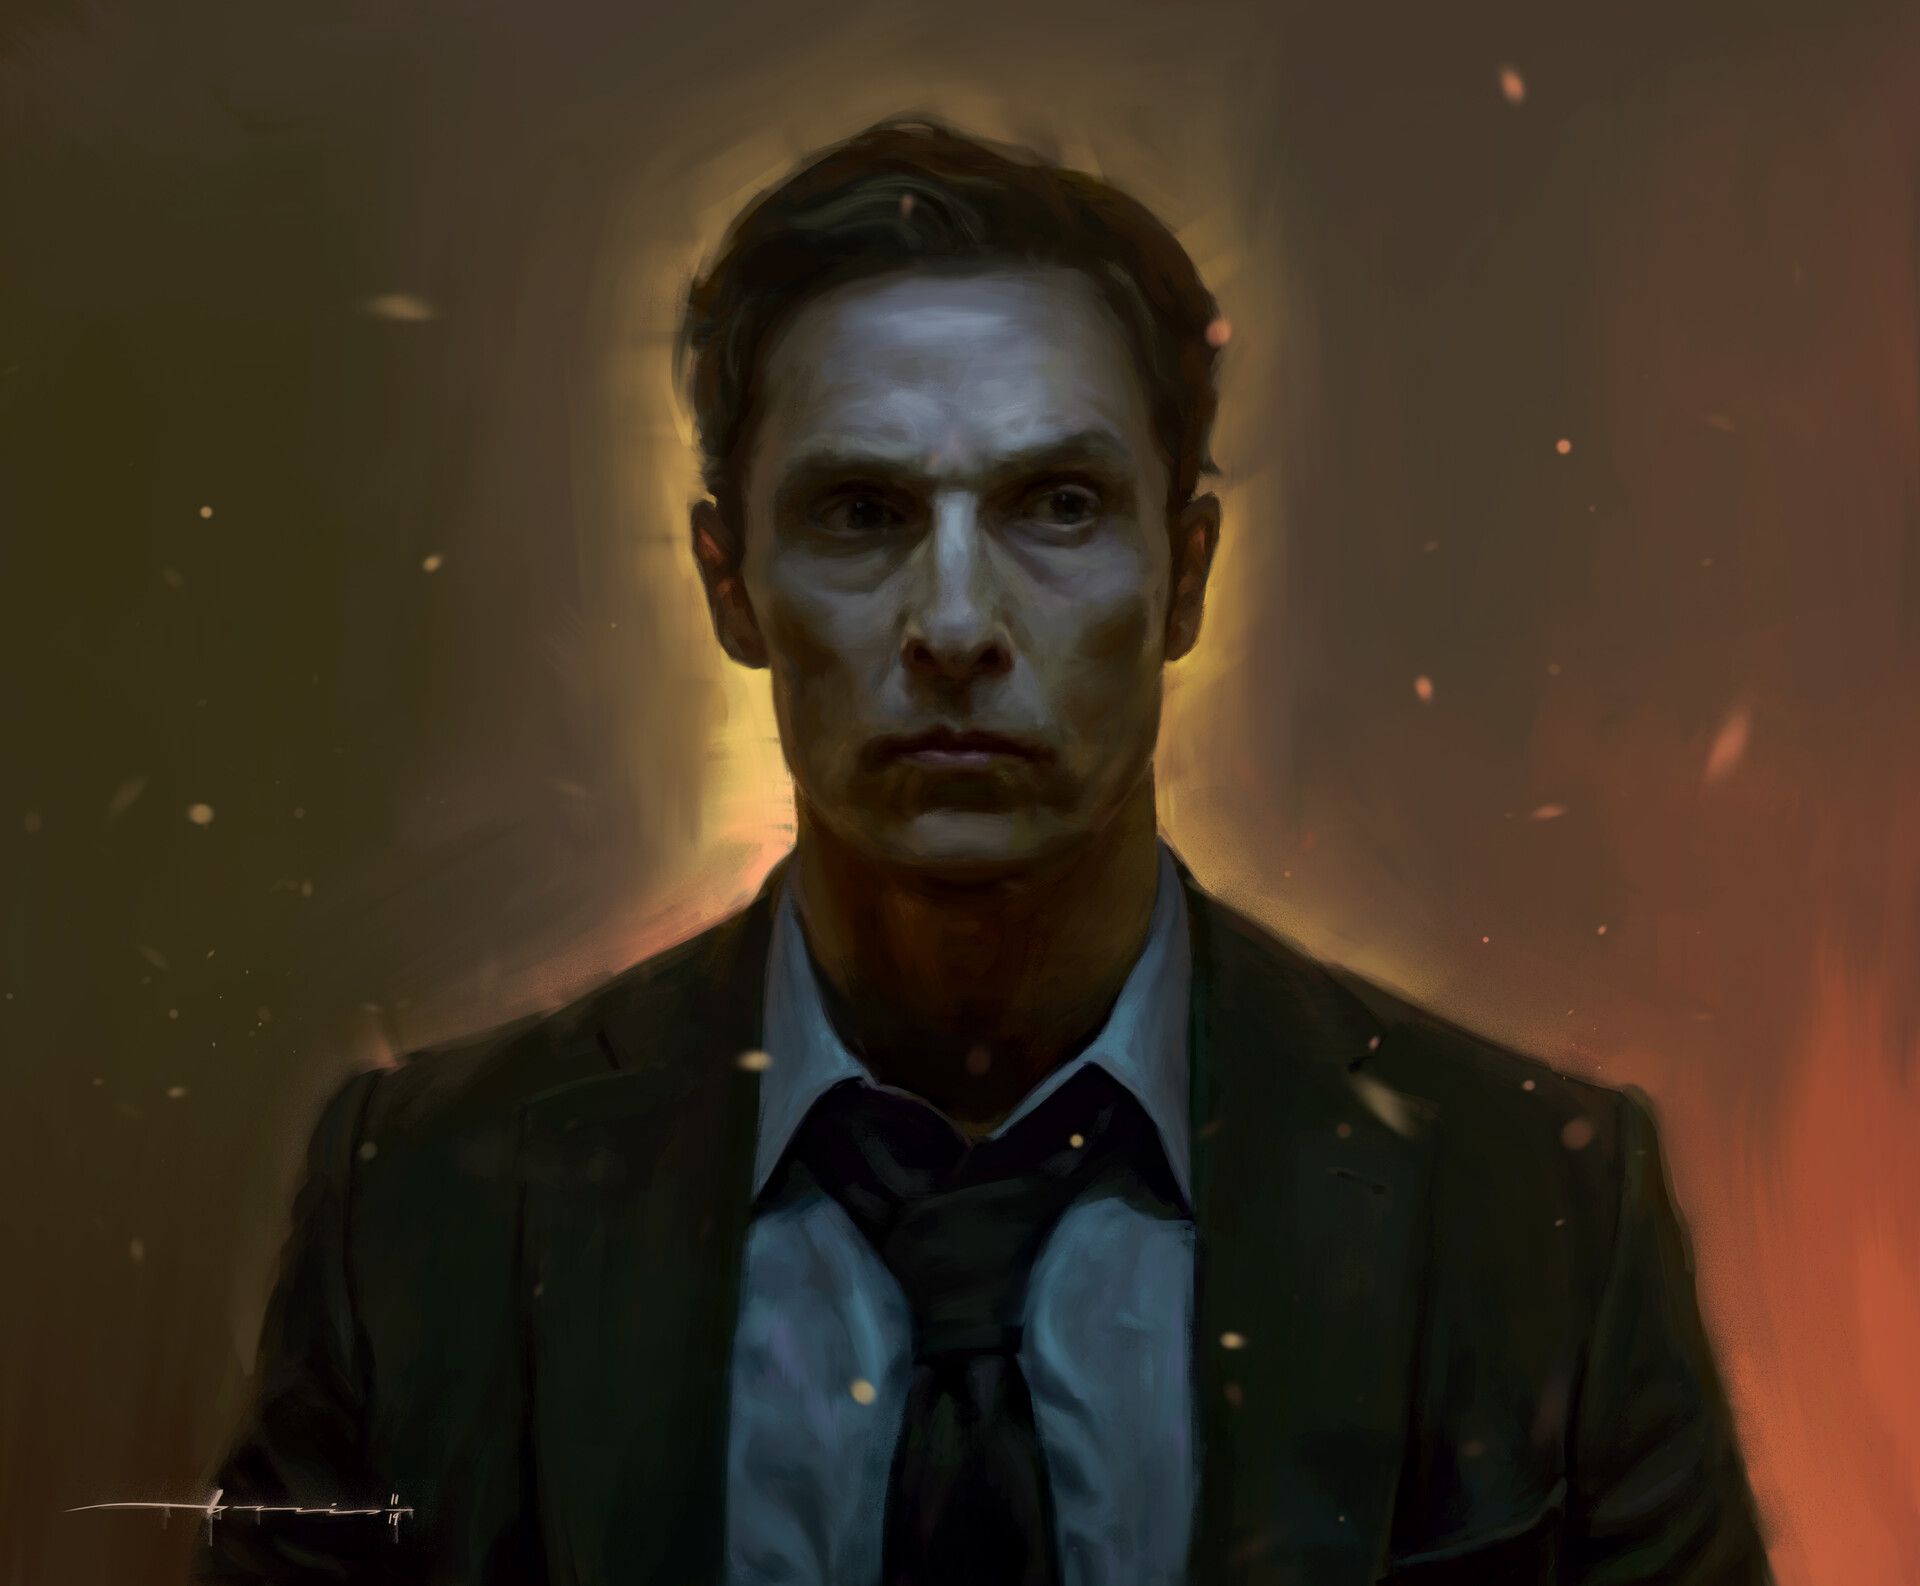 Rust Cohle - Matthew McConaughey, Rust Cole, True detective (TV series), Serials, Drawing